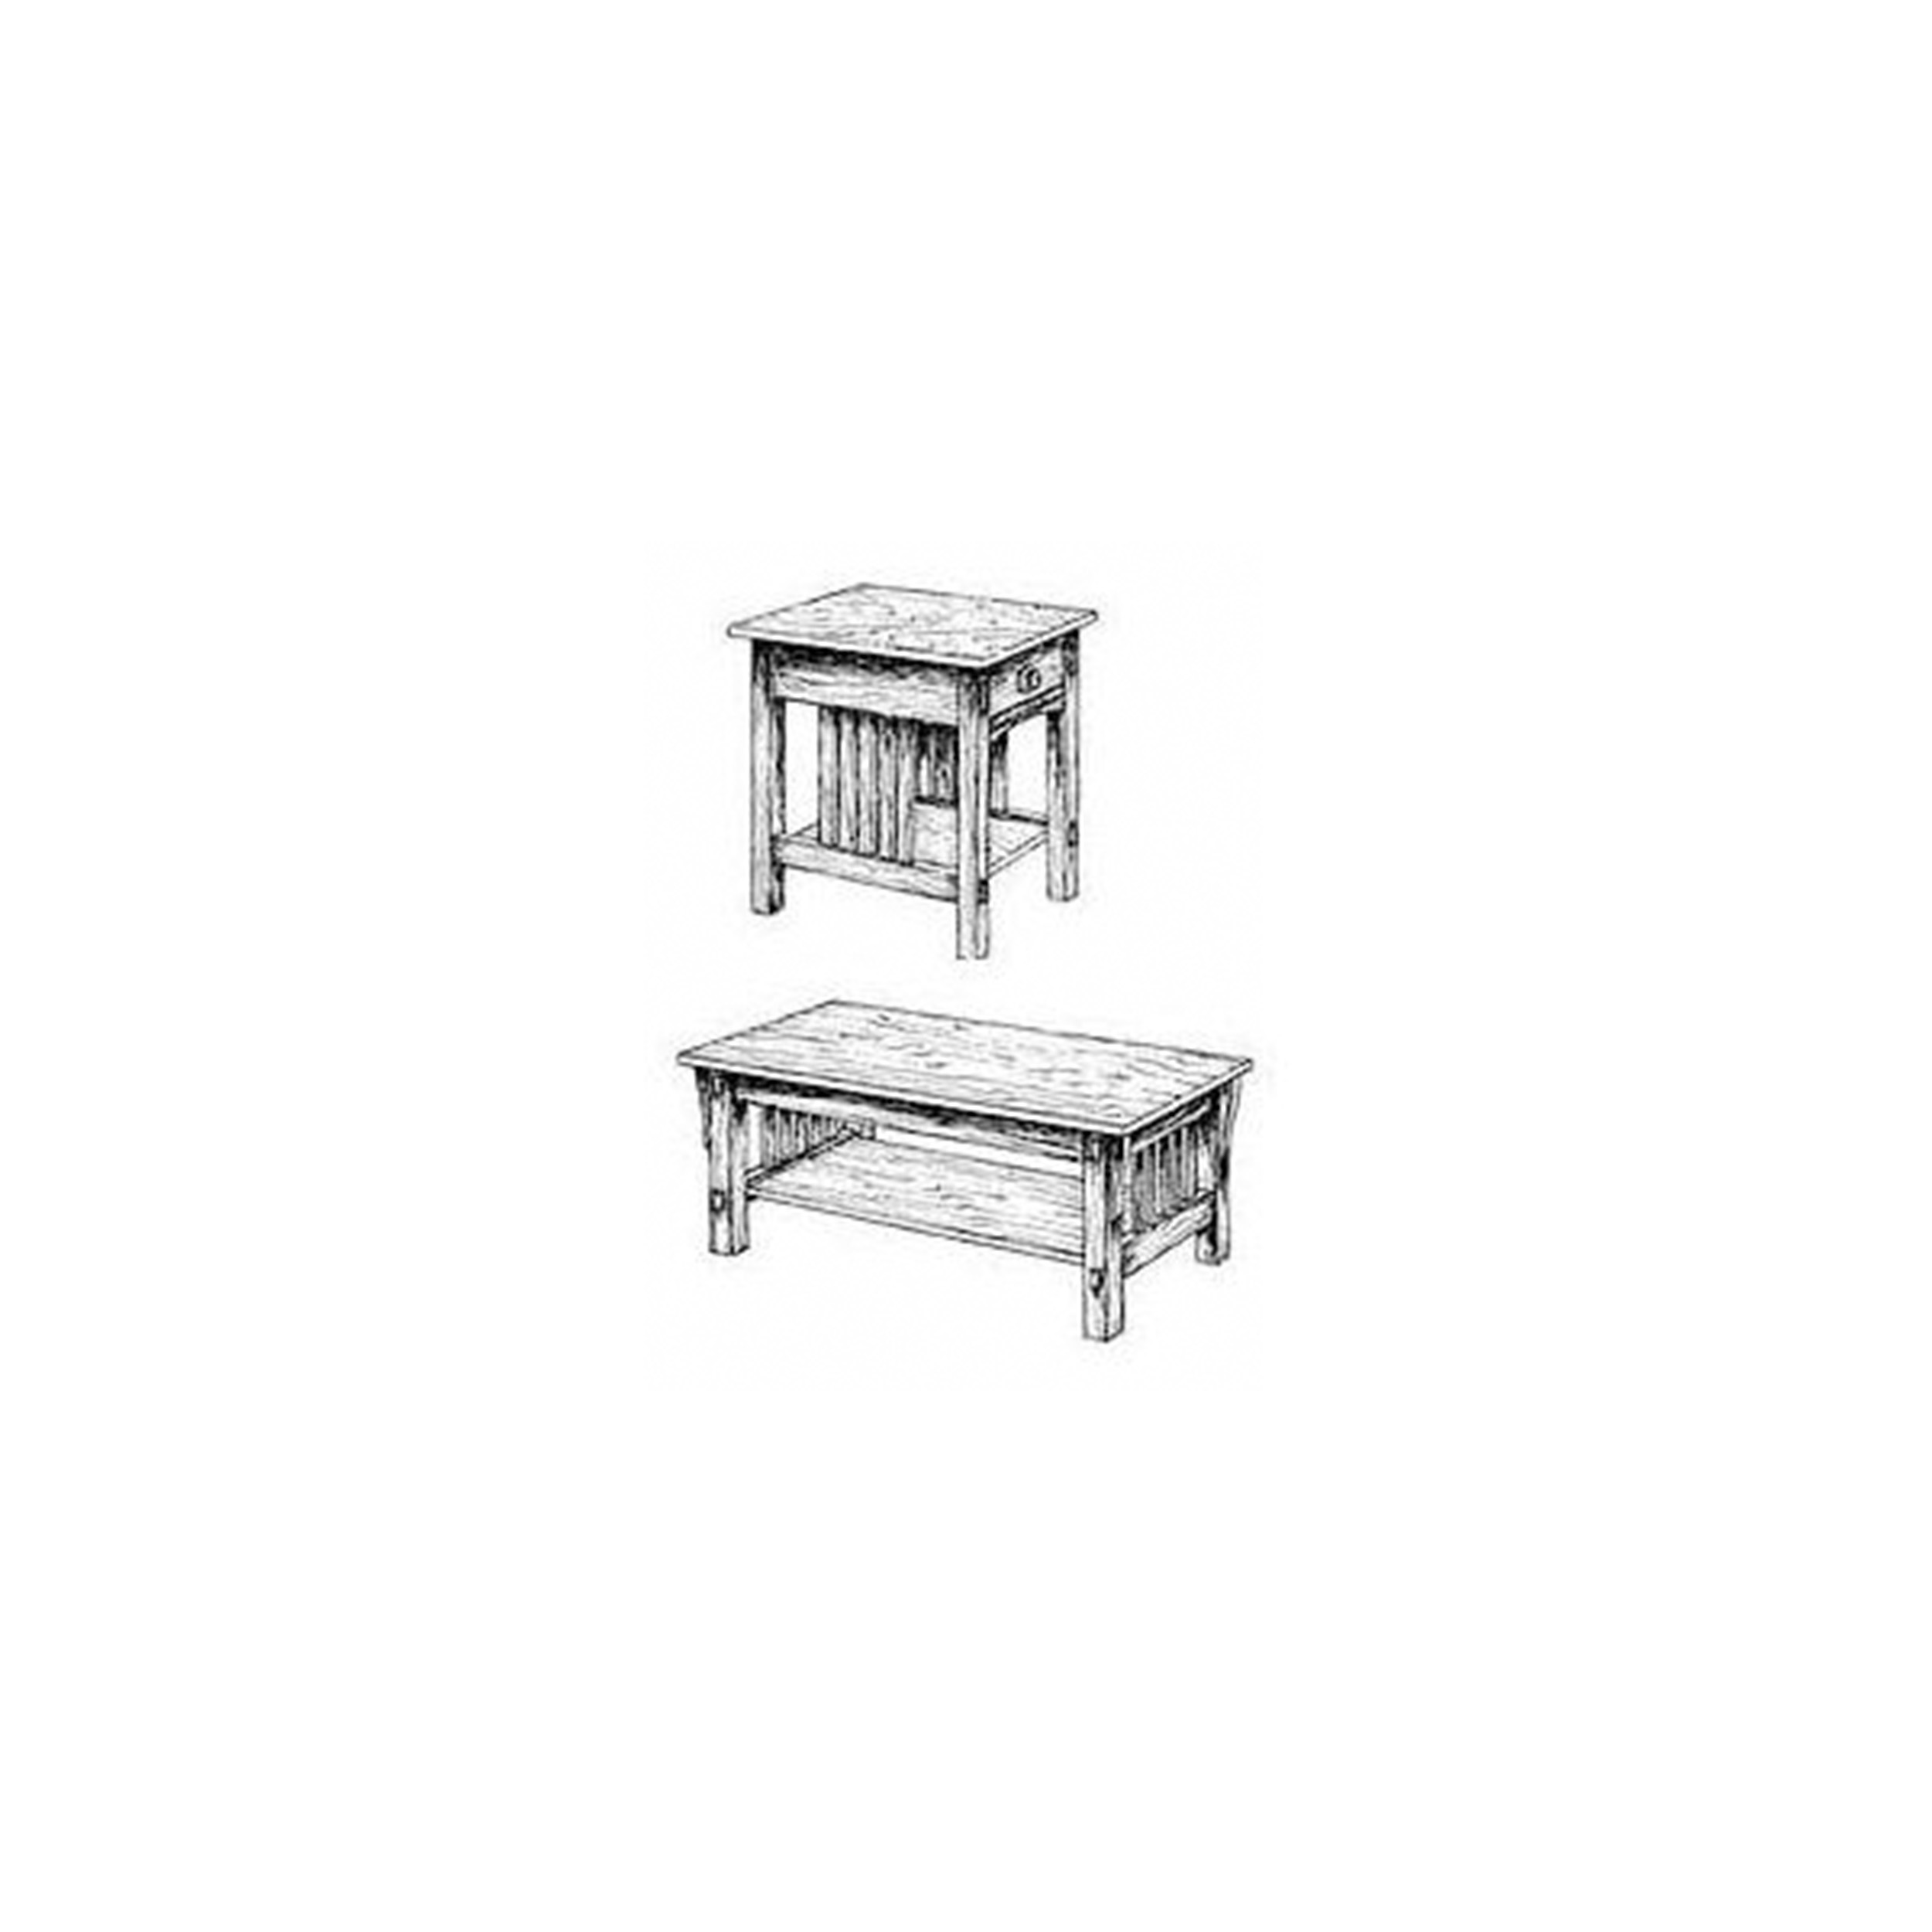 Mission Living Room Tables Woodworking Plan